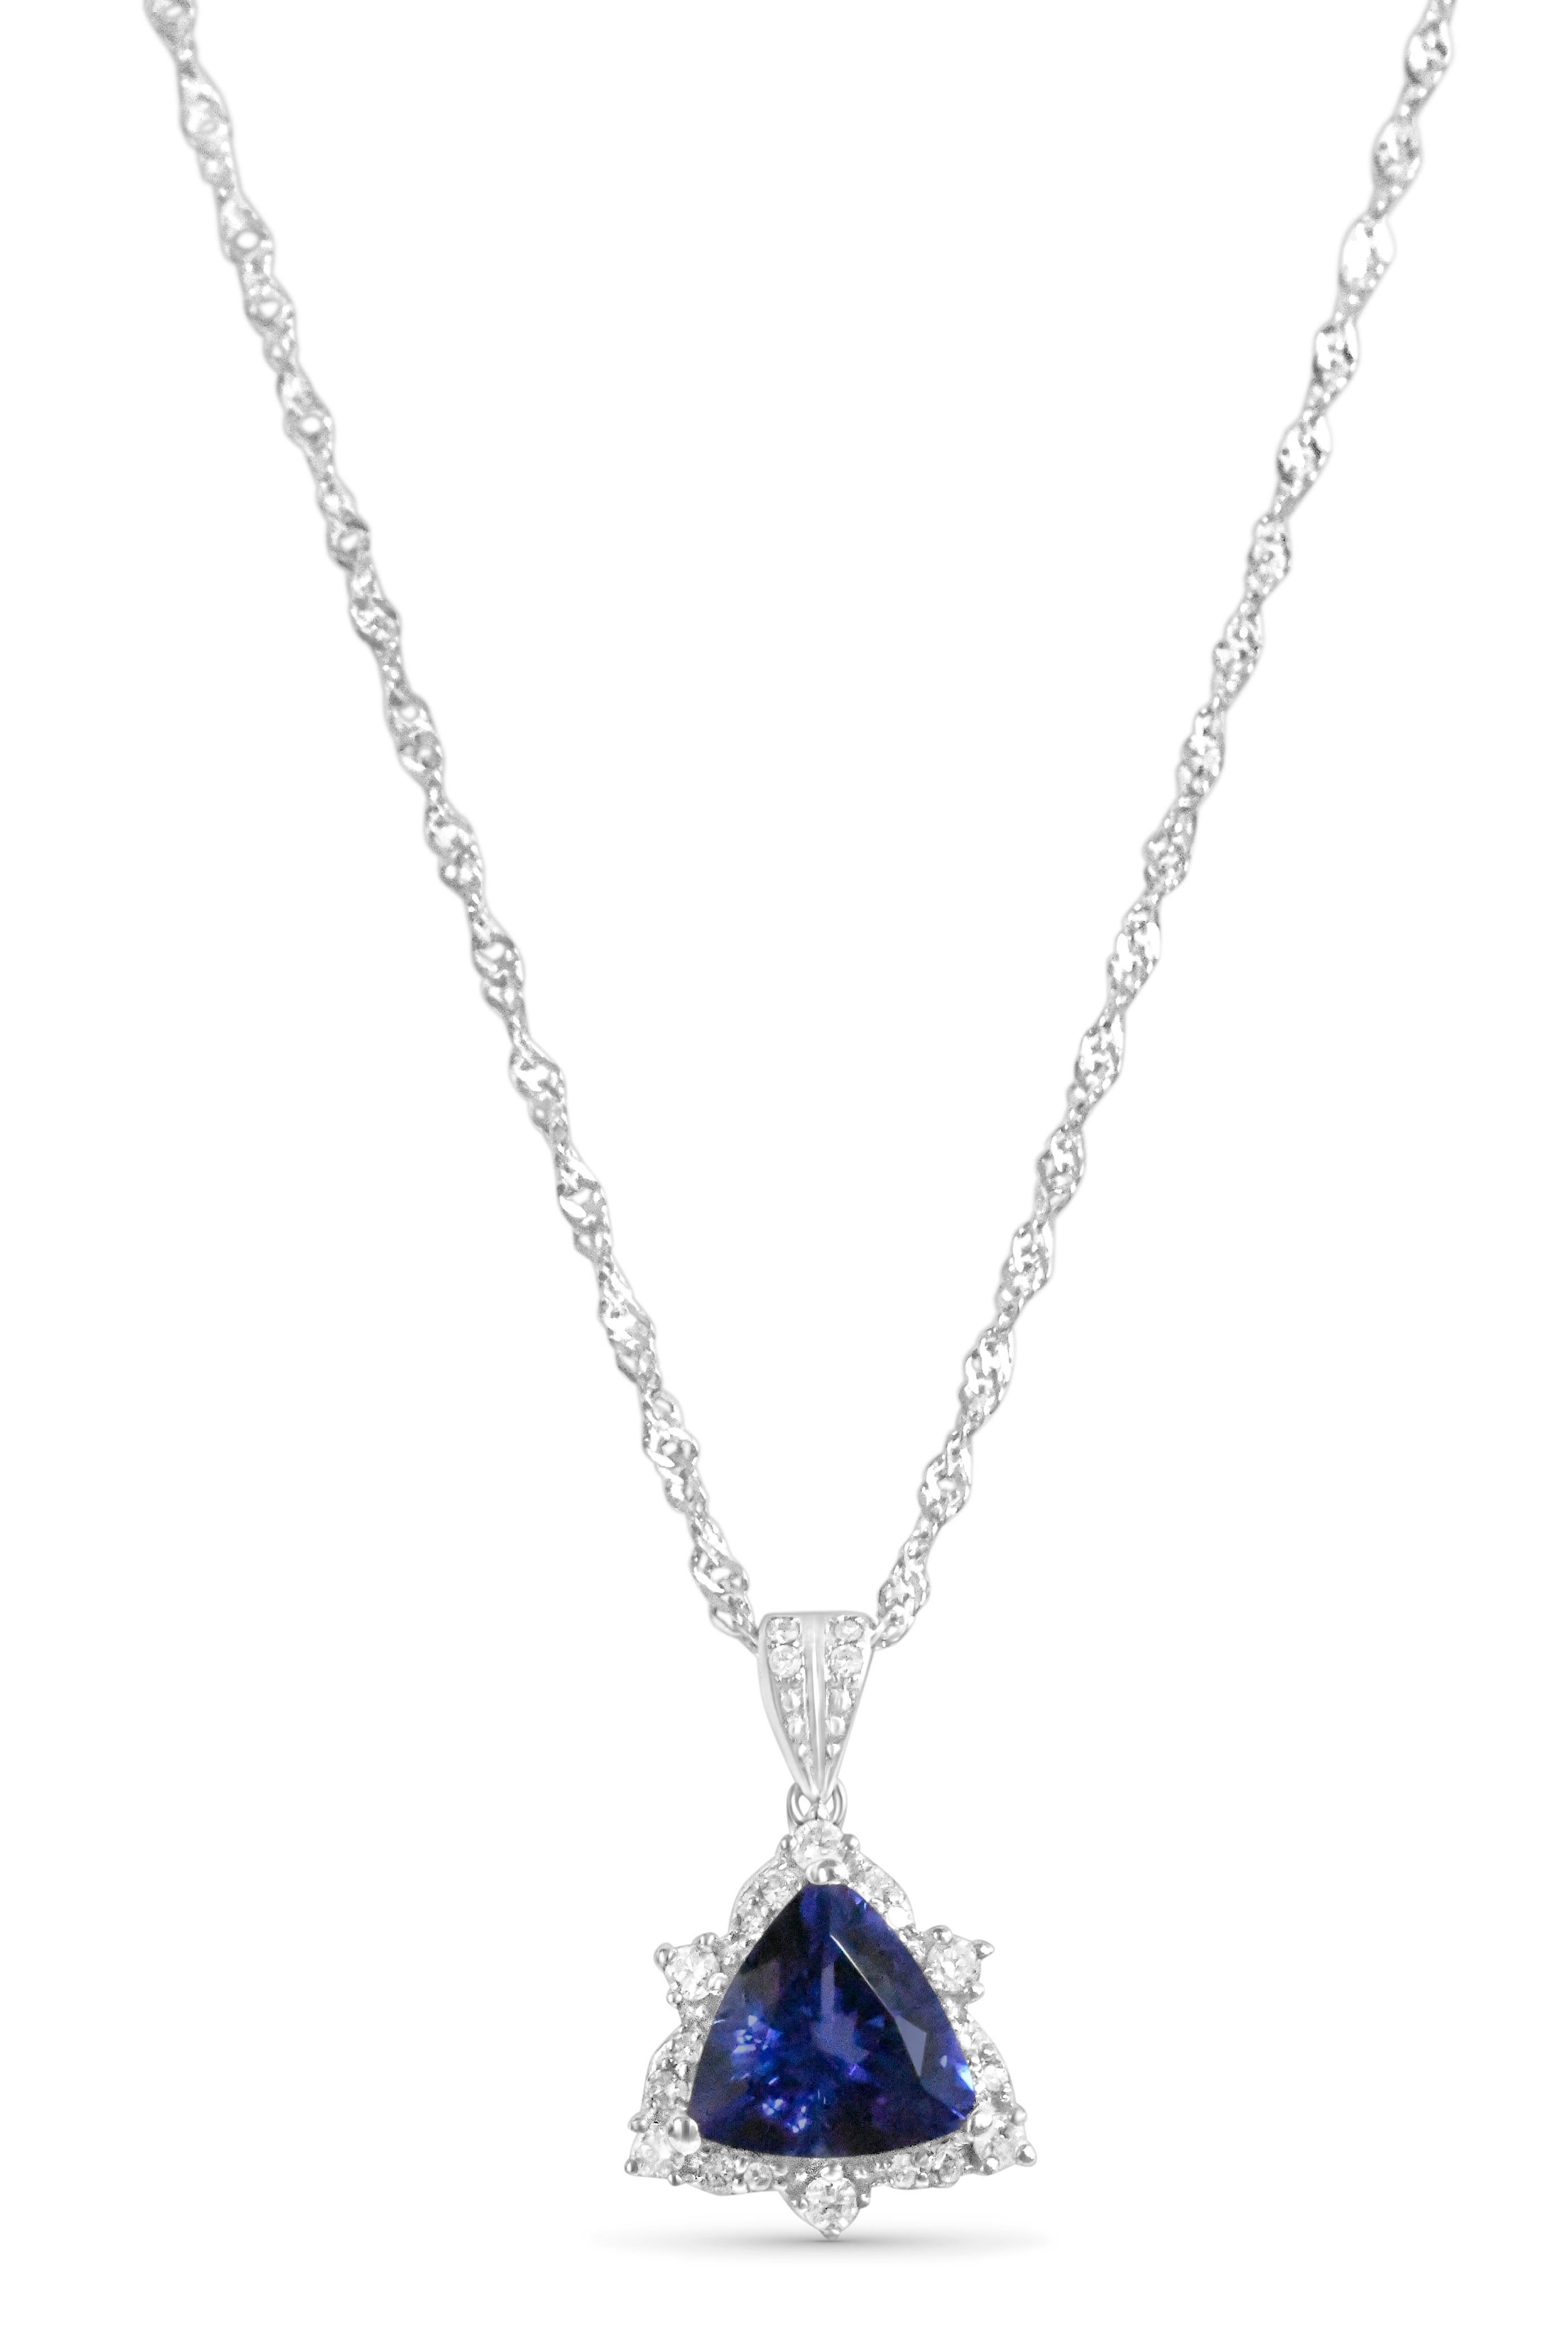 Women's Woman Wedding Tanzanite Pendant Necklace 2.64 cts 9k White  Gold  For Sale